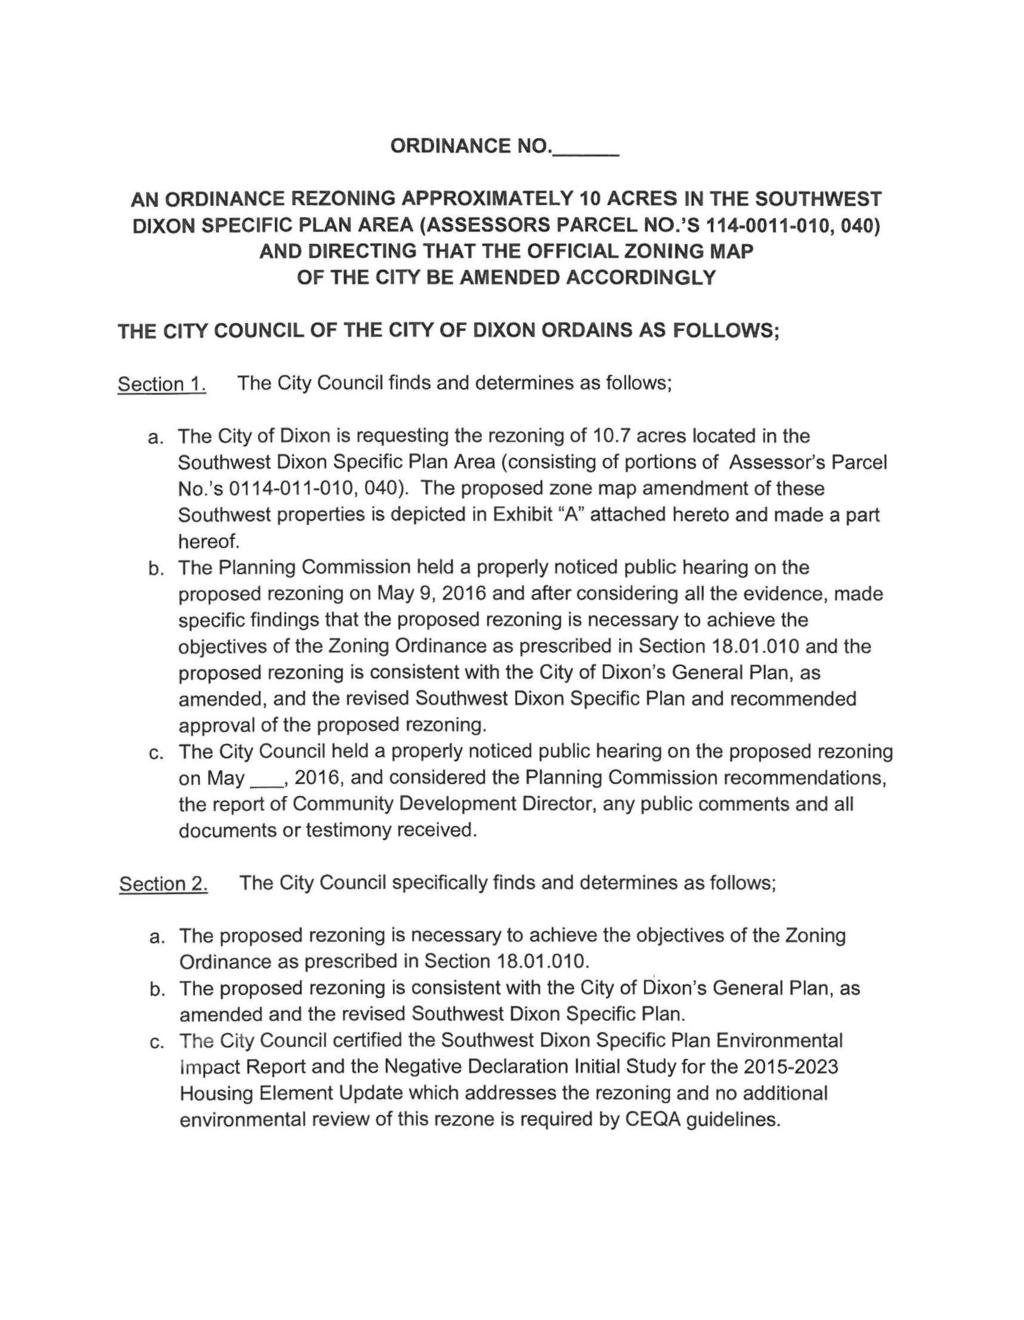 ORDINANCE NO. AN ORDINANCE REZONING APPROXIMATELY 10 ACRES IN THE SOUTHWEST DIXON SPECIFIC PLAN AREA (ASSESSORS PARCEL NO.